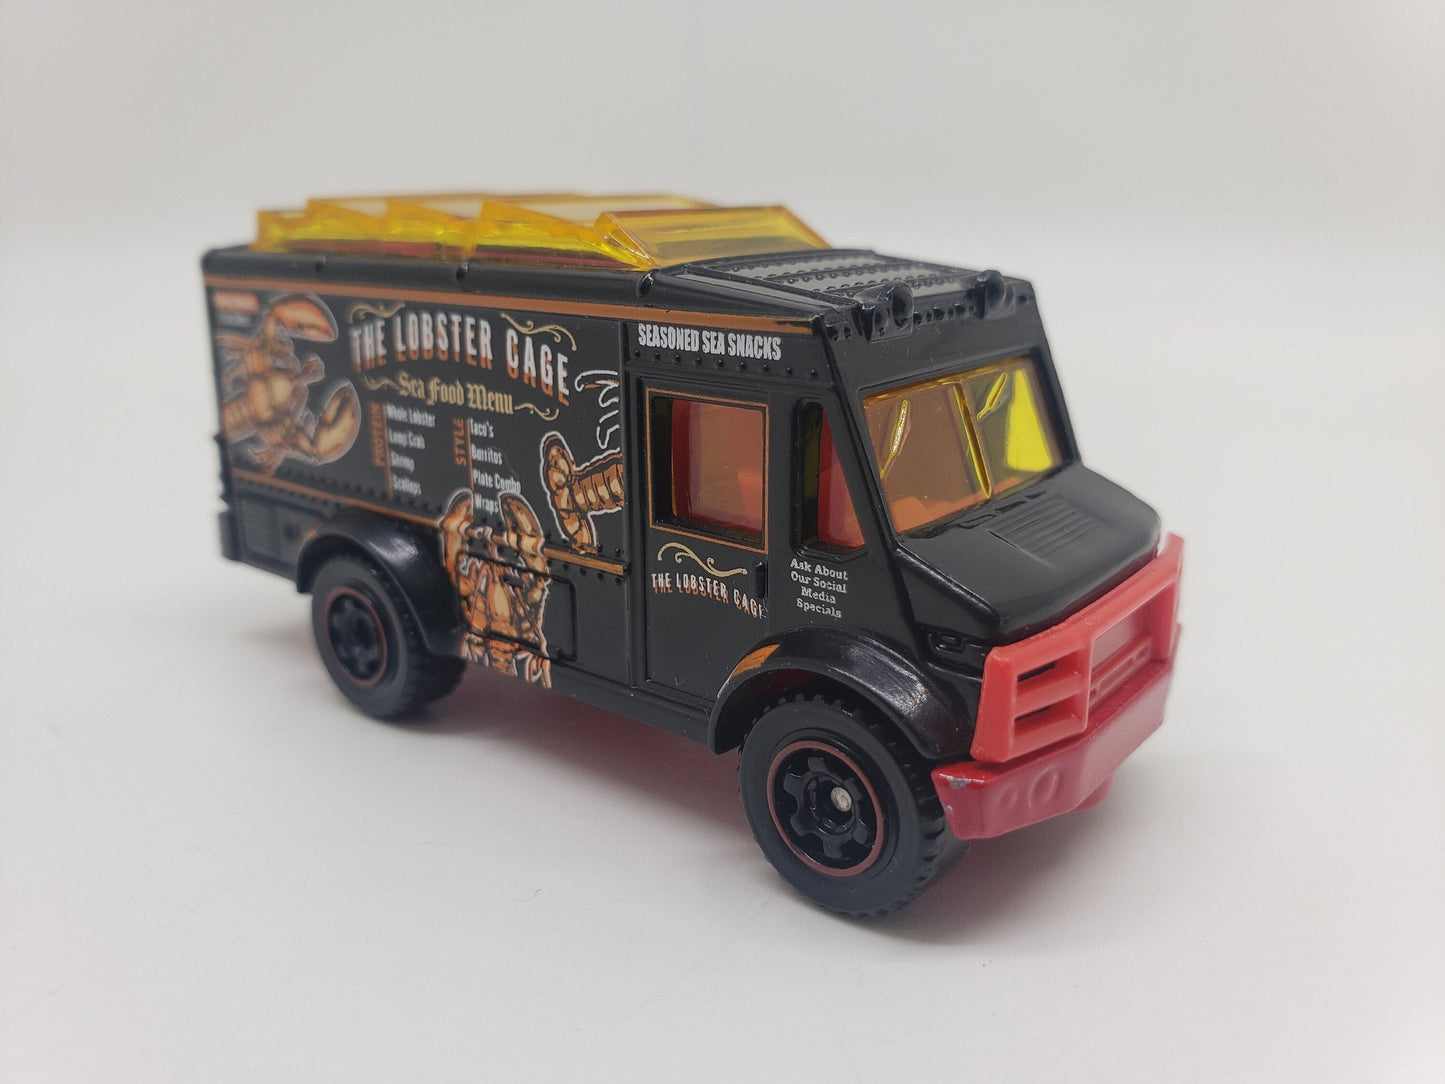 Matchbox Food Truck The Lobster Cage Black MBX City Perfect Birthday Gift Miniature Collectable Model Toy Car Chow Wagon Chow Mobile